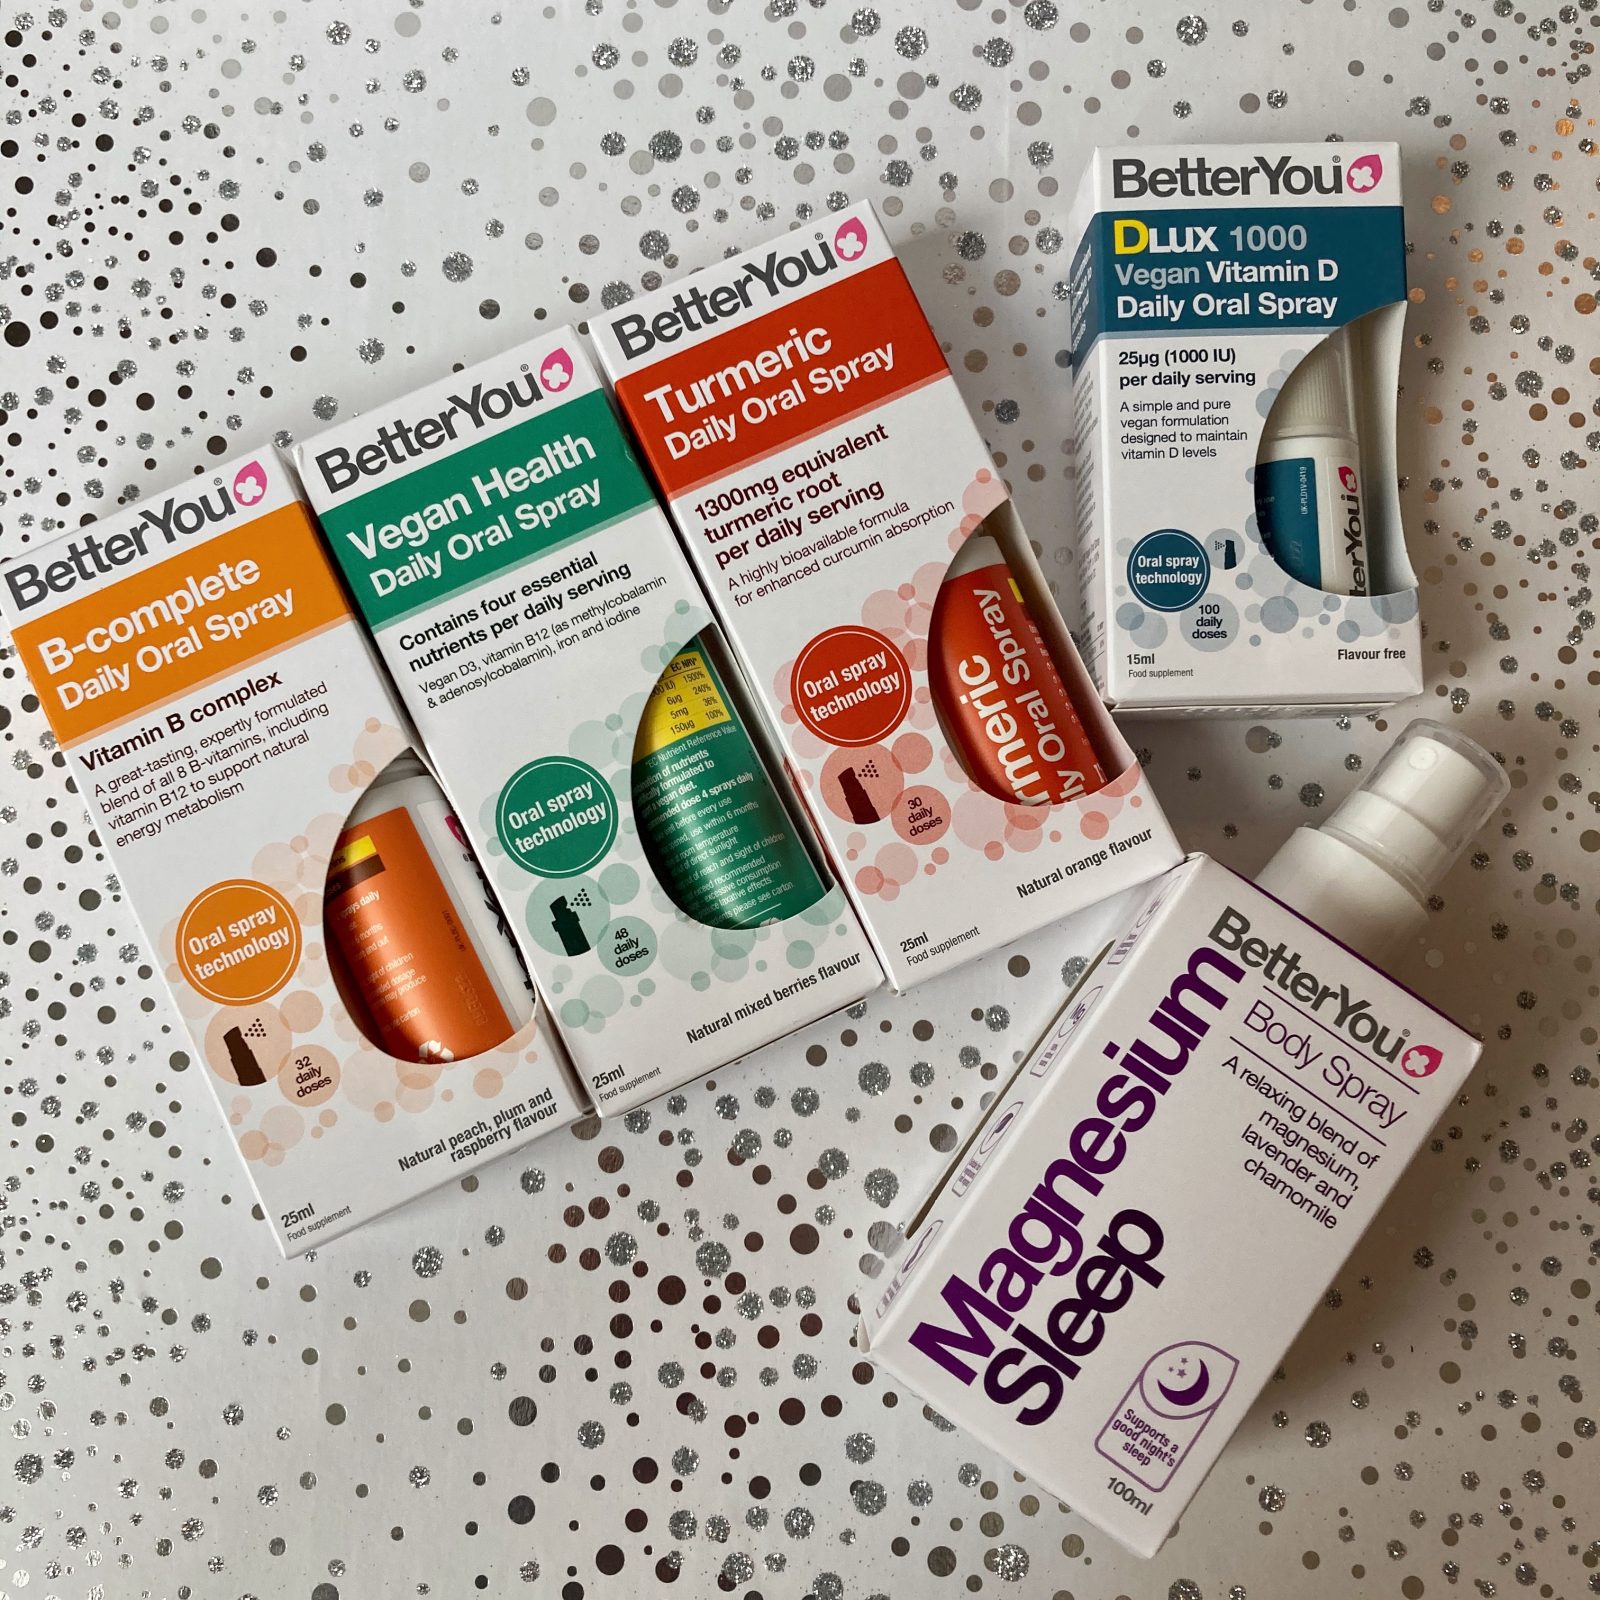 four of BetterYou's colourful transdermal sprays, turmeric, vegan health, b-complete and vitamin d, and magnesium sleep spray, flatlayed on top of white and silver sparkly background